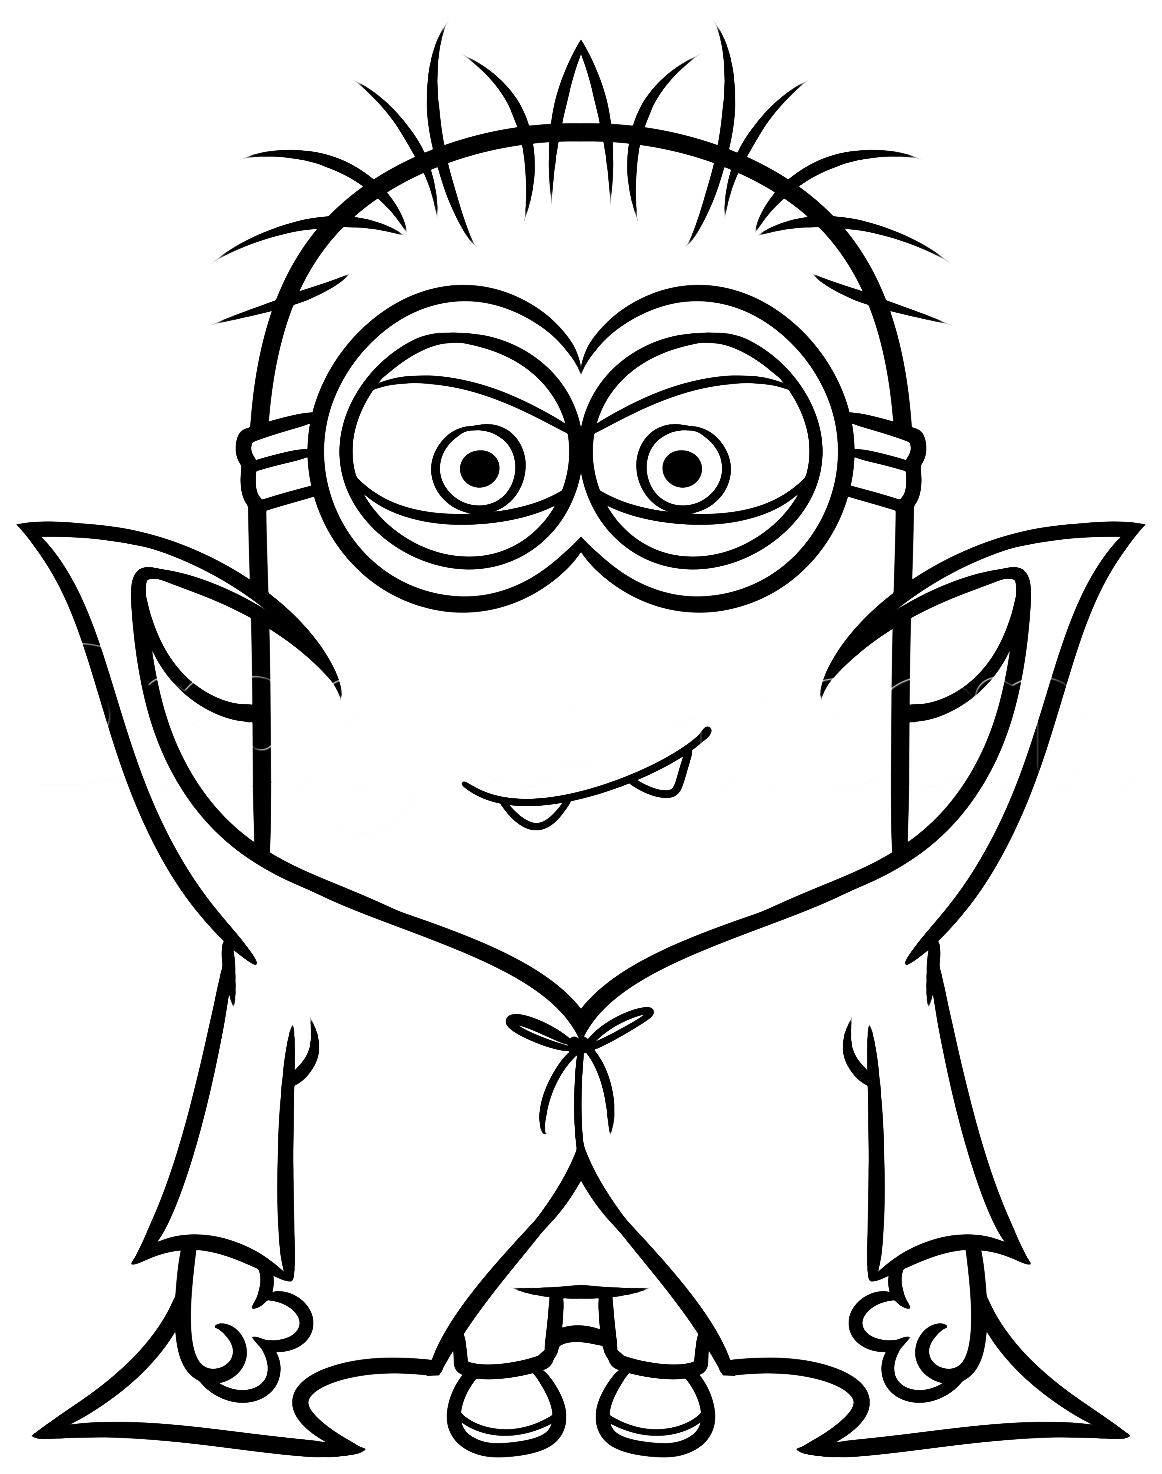 Nice simple Minions coloring pages for kids